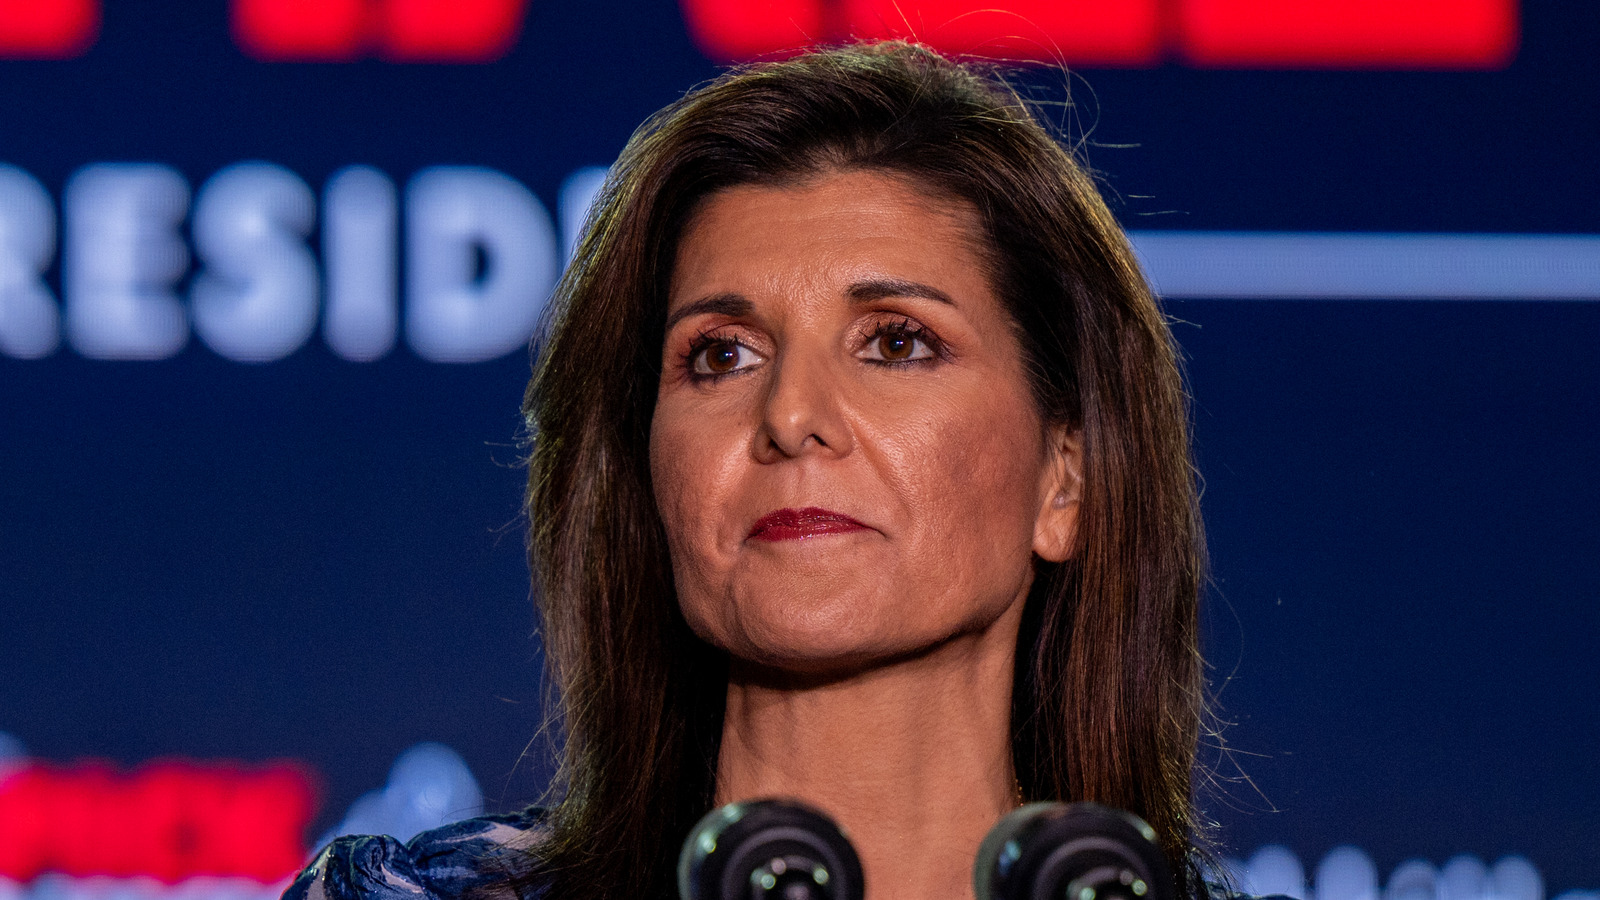 The Real Reason You Don't See Much Of Nikki Haley's Husband